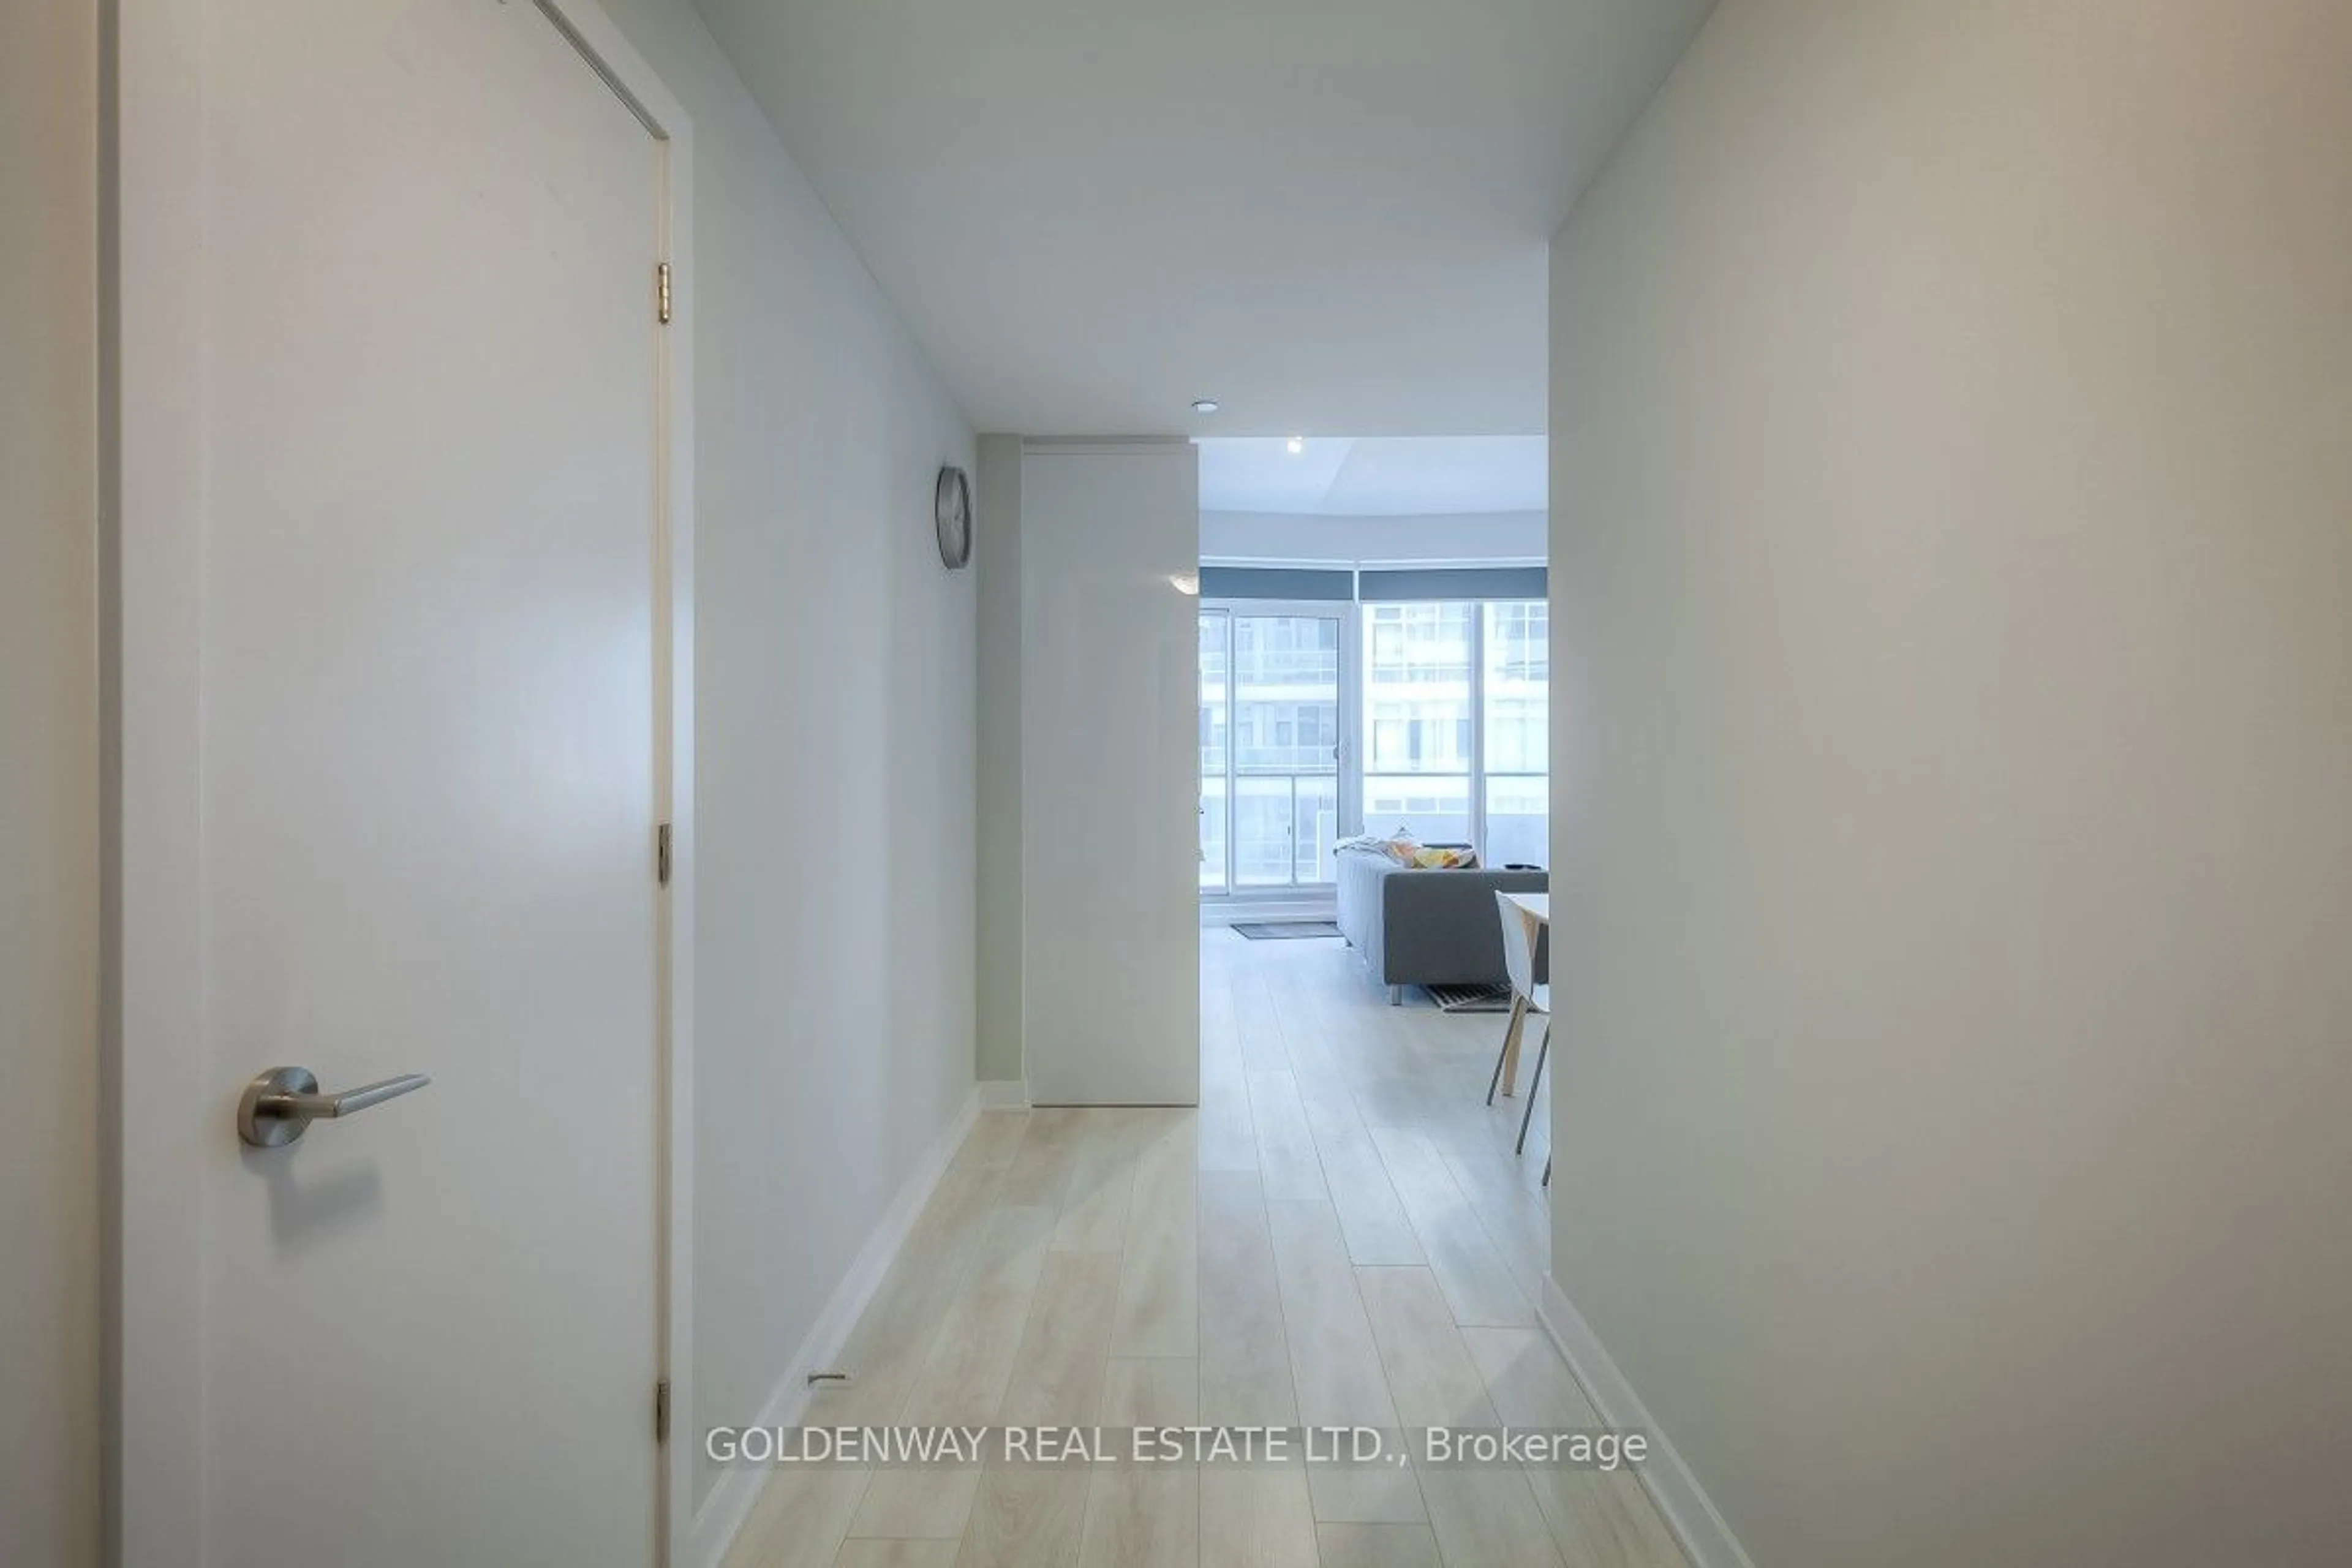 A pic of a room for 2221 Yonge St #3005, Toronto Ontario M4S 2B4